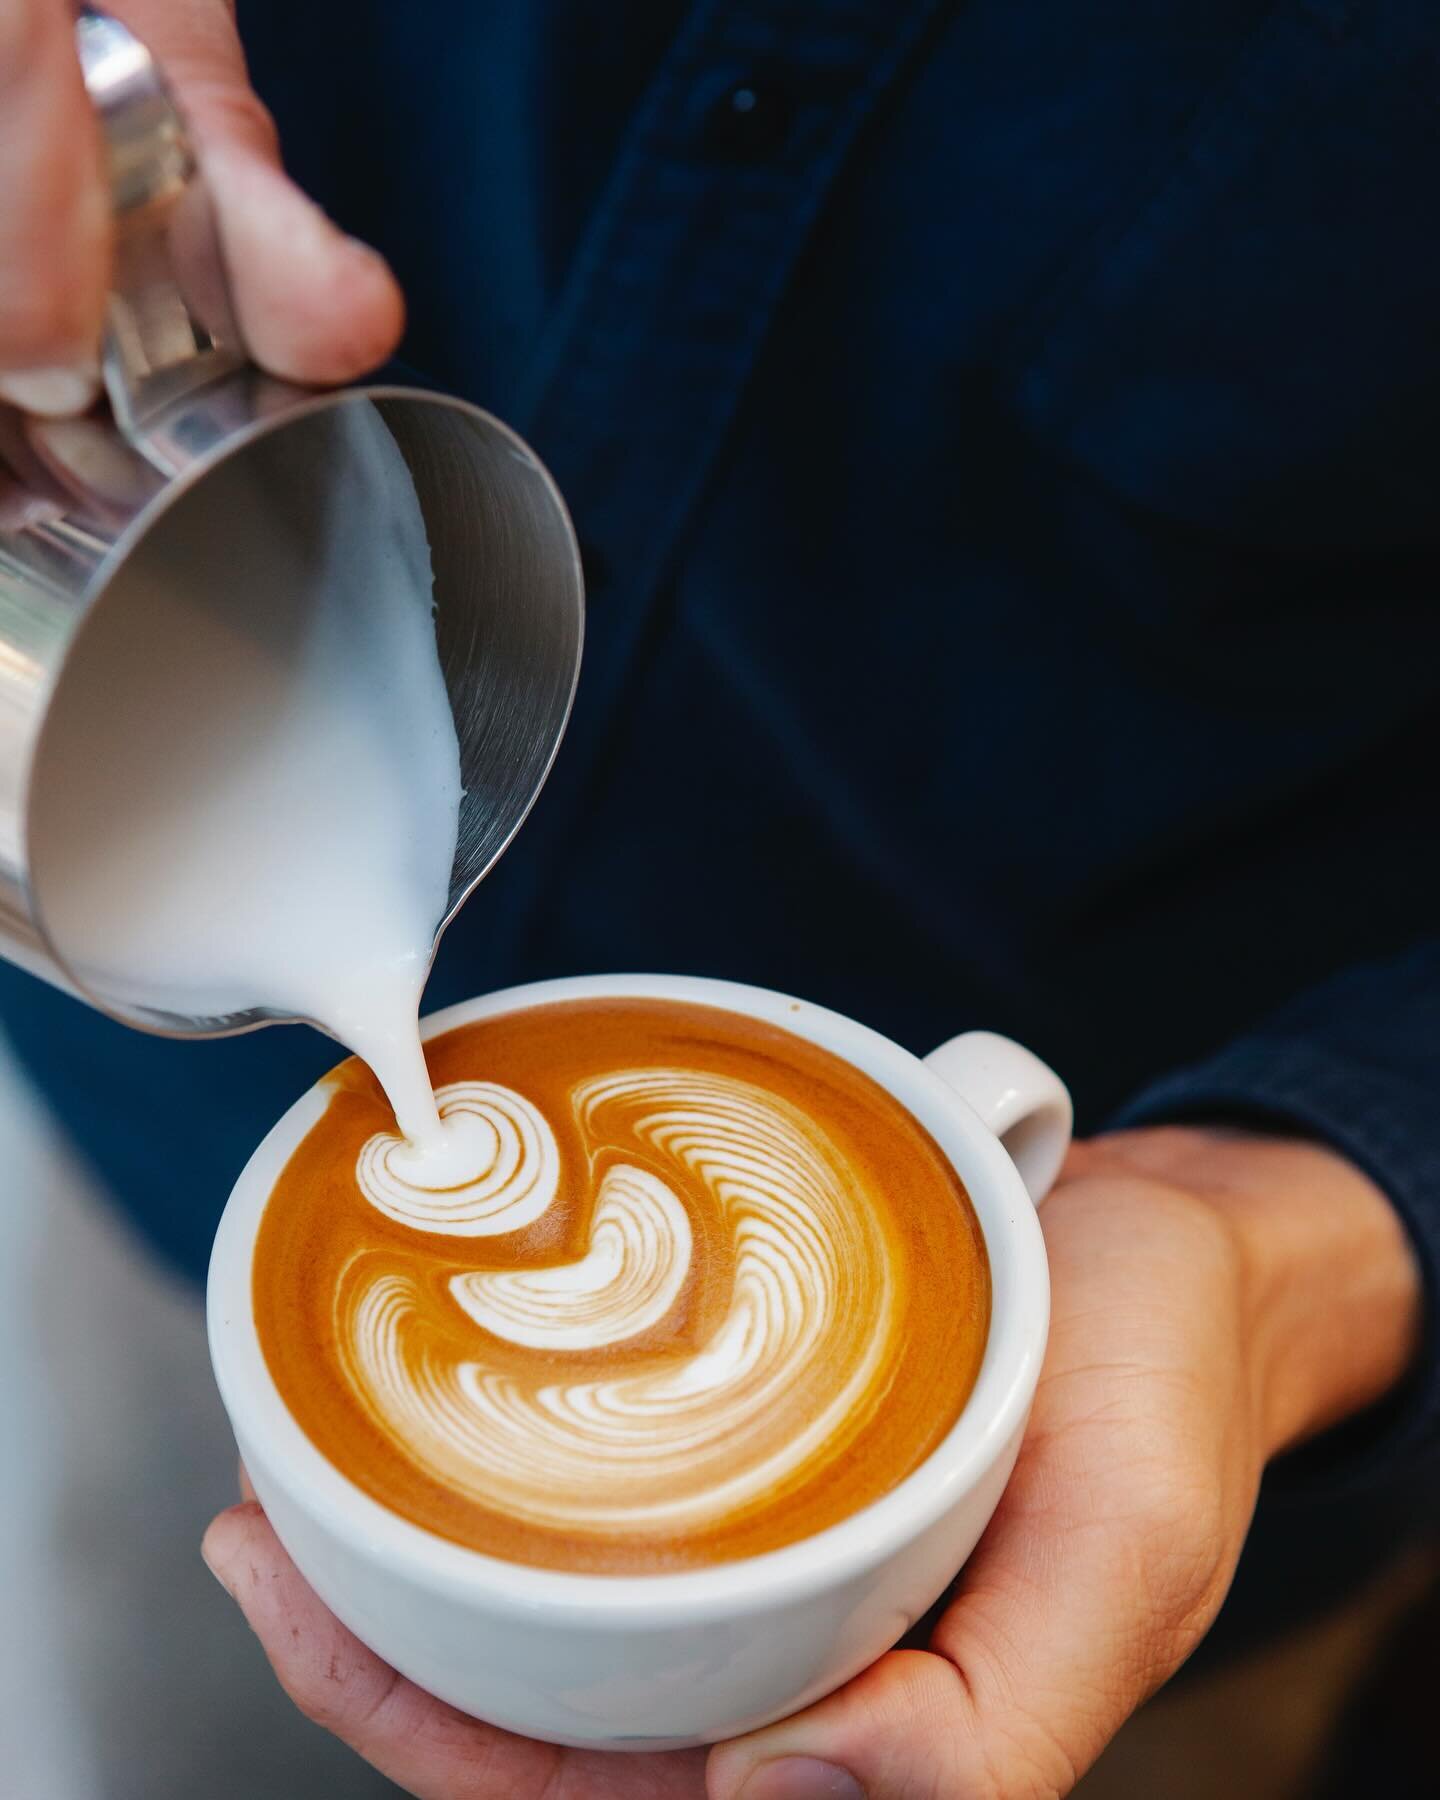 ☕️ It&rsquo;s the last week to get $1 off of any espresso beverage at the Market! Visit us between 7:30 - 10:30 am, Monday through Friday, and get the espresso beverage of your choice for less. Offer ends Friday, March 29th!

#mainstreetmarkets #midc